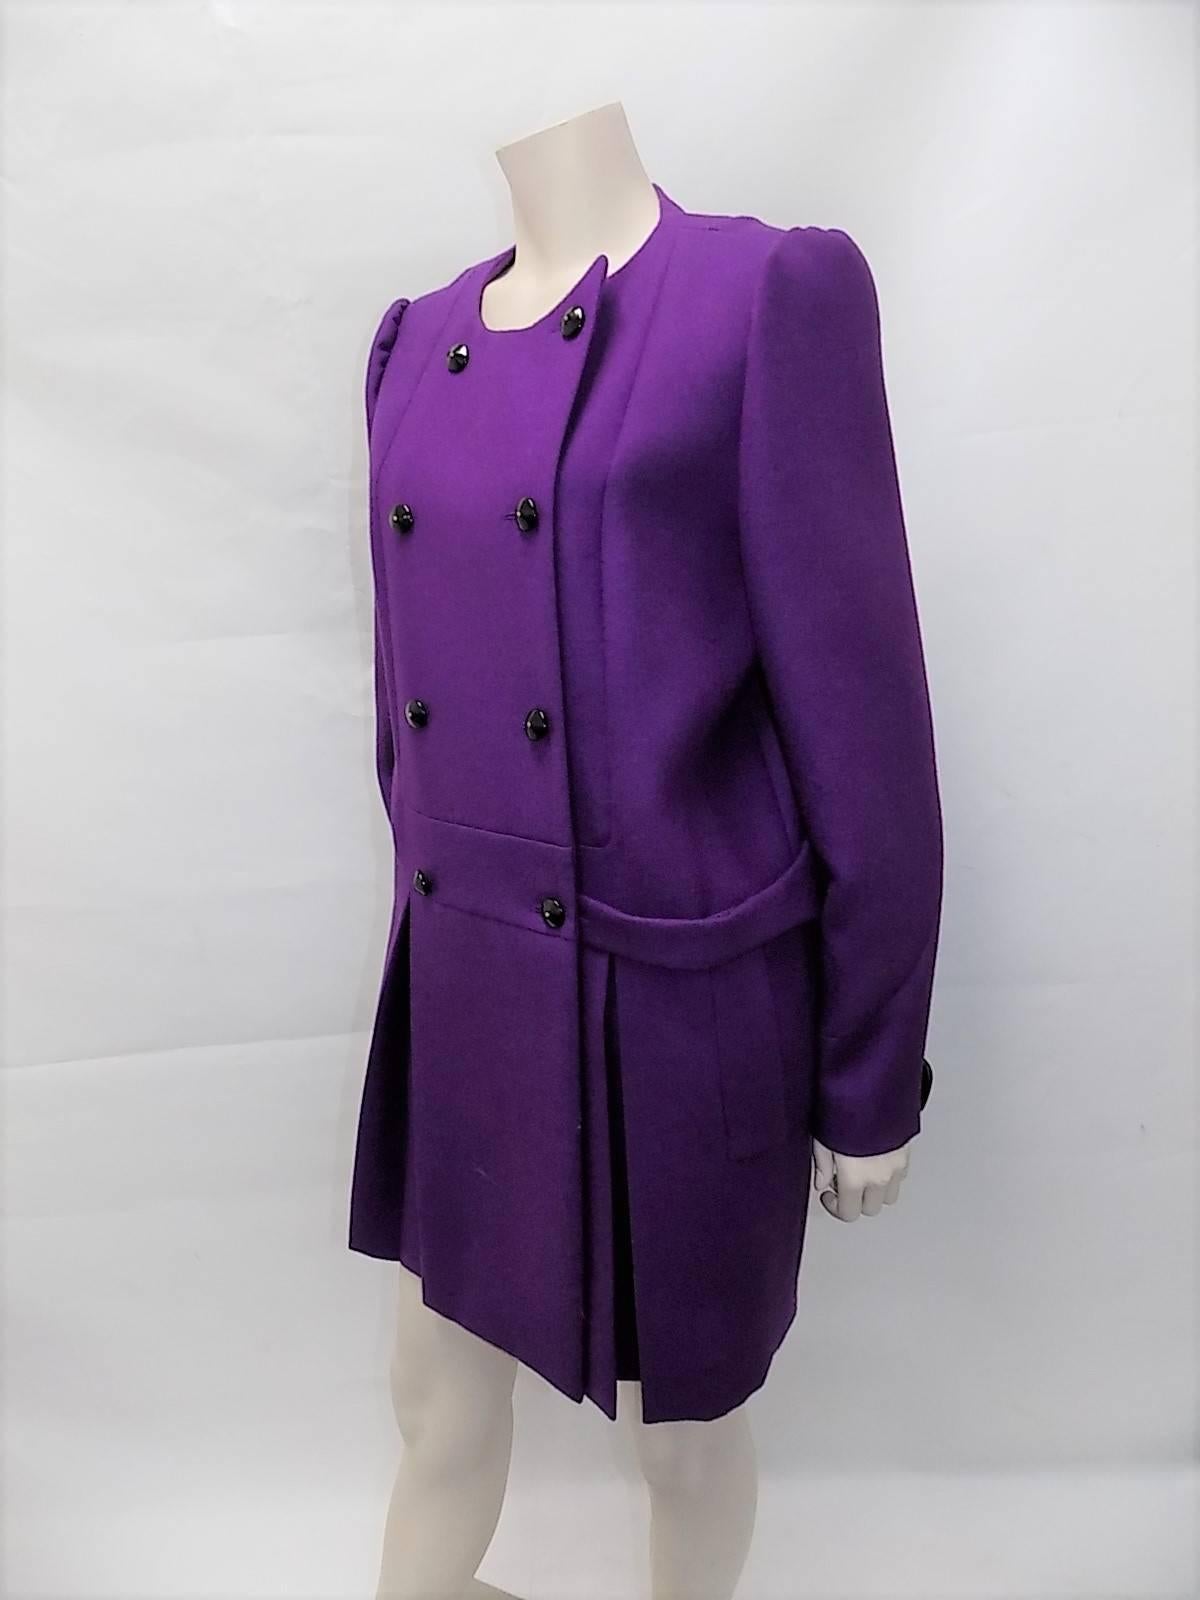 Women's New With Tags Yves Saint Laurent Purple wool  Coat W Leather Buttons sz 46